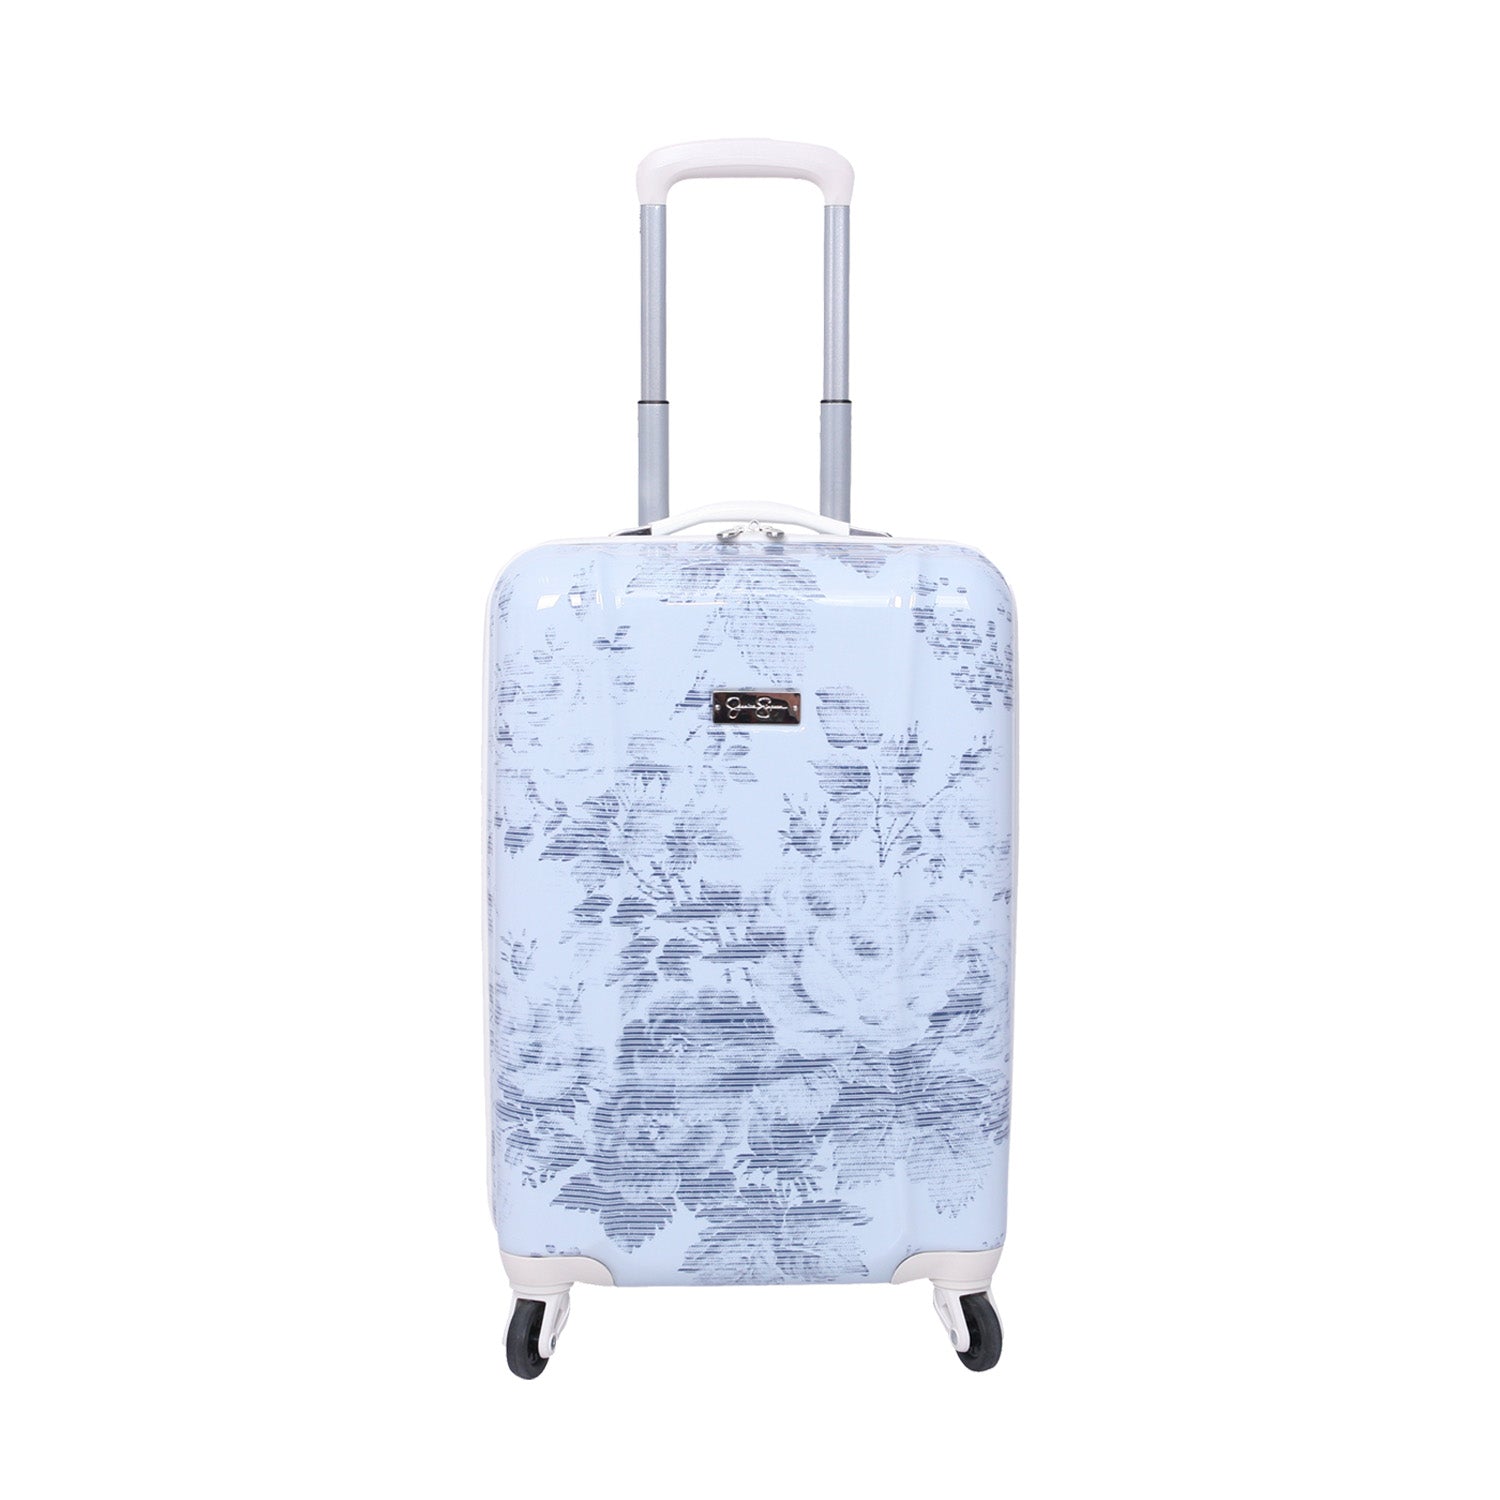 Jessica Simpson Breton Spinner Luggage Collection - Navy